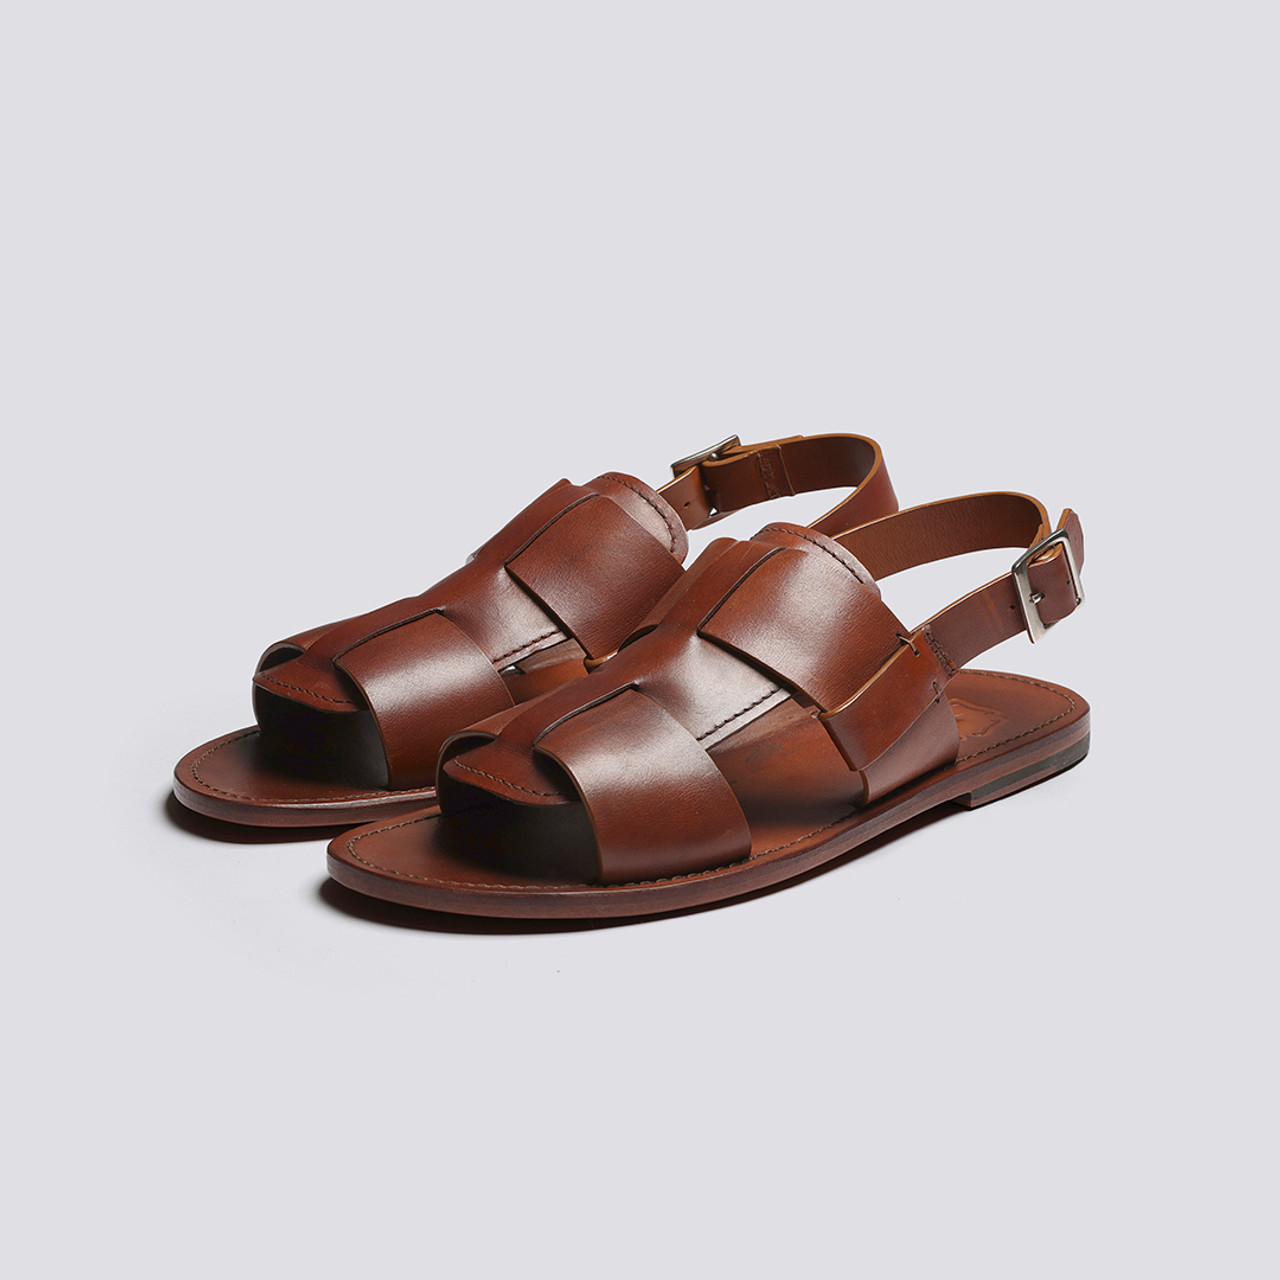 Wiley 3 | Mens Sandals in Tan Handpainted Leather | Grenson